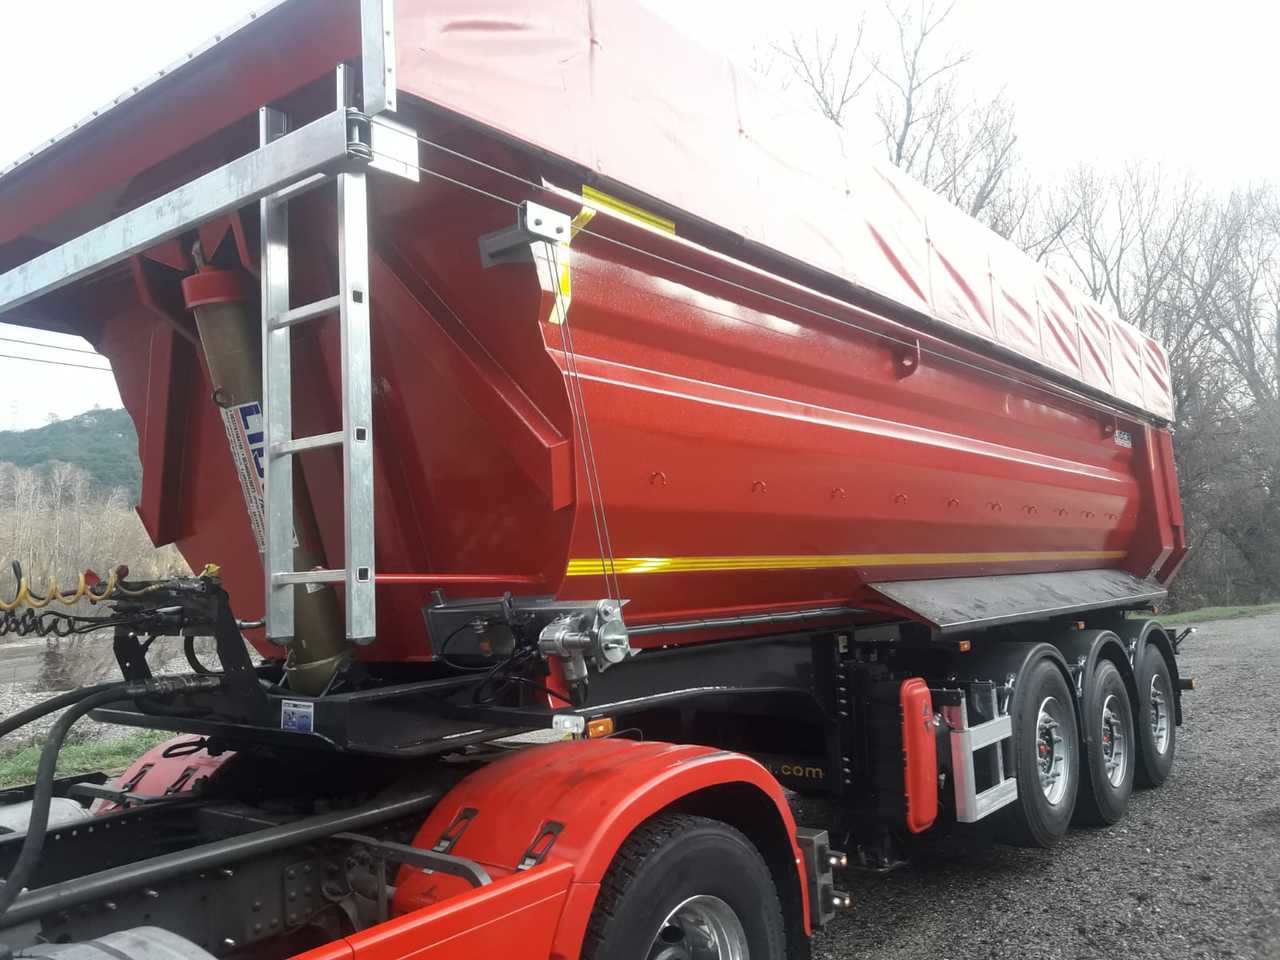 LIDER 2022 MODELS YEAR NEW (MANUFACTURER COMPANY LIDER TRAILER & TANKER - Leasing LIDER 2022 MODELS YEAR NEW (MANUFACTURER COMPANY LIDER TRAILER & TANKER: das Bild 3